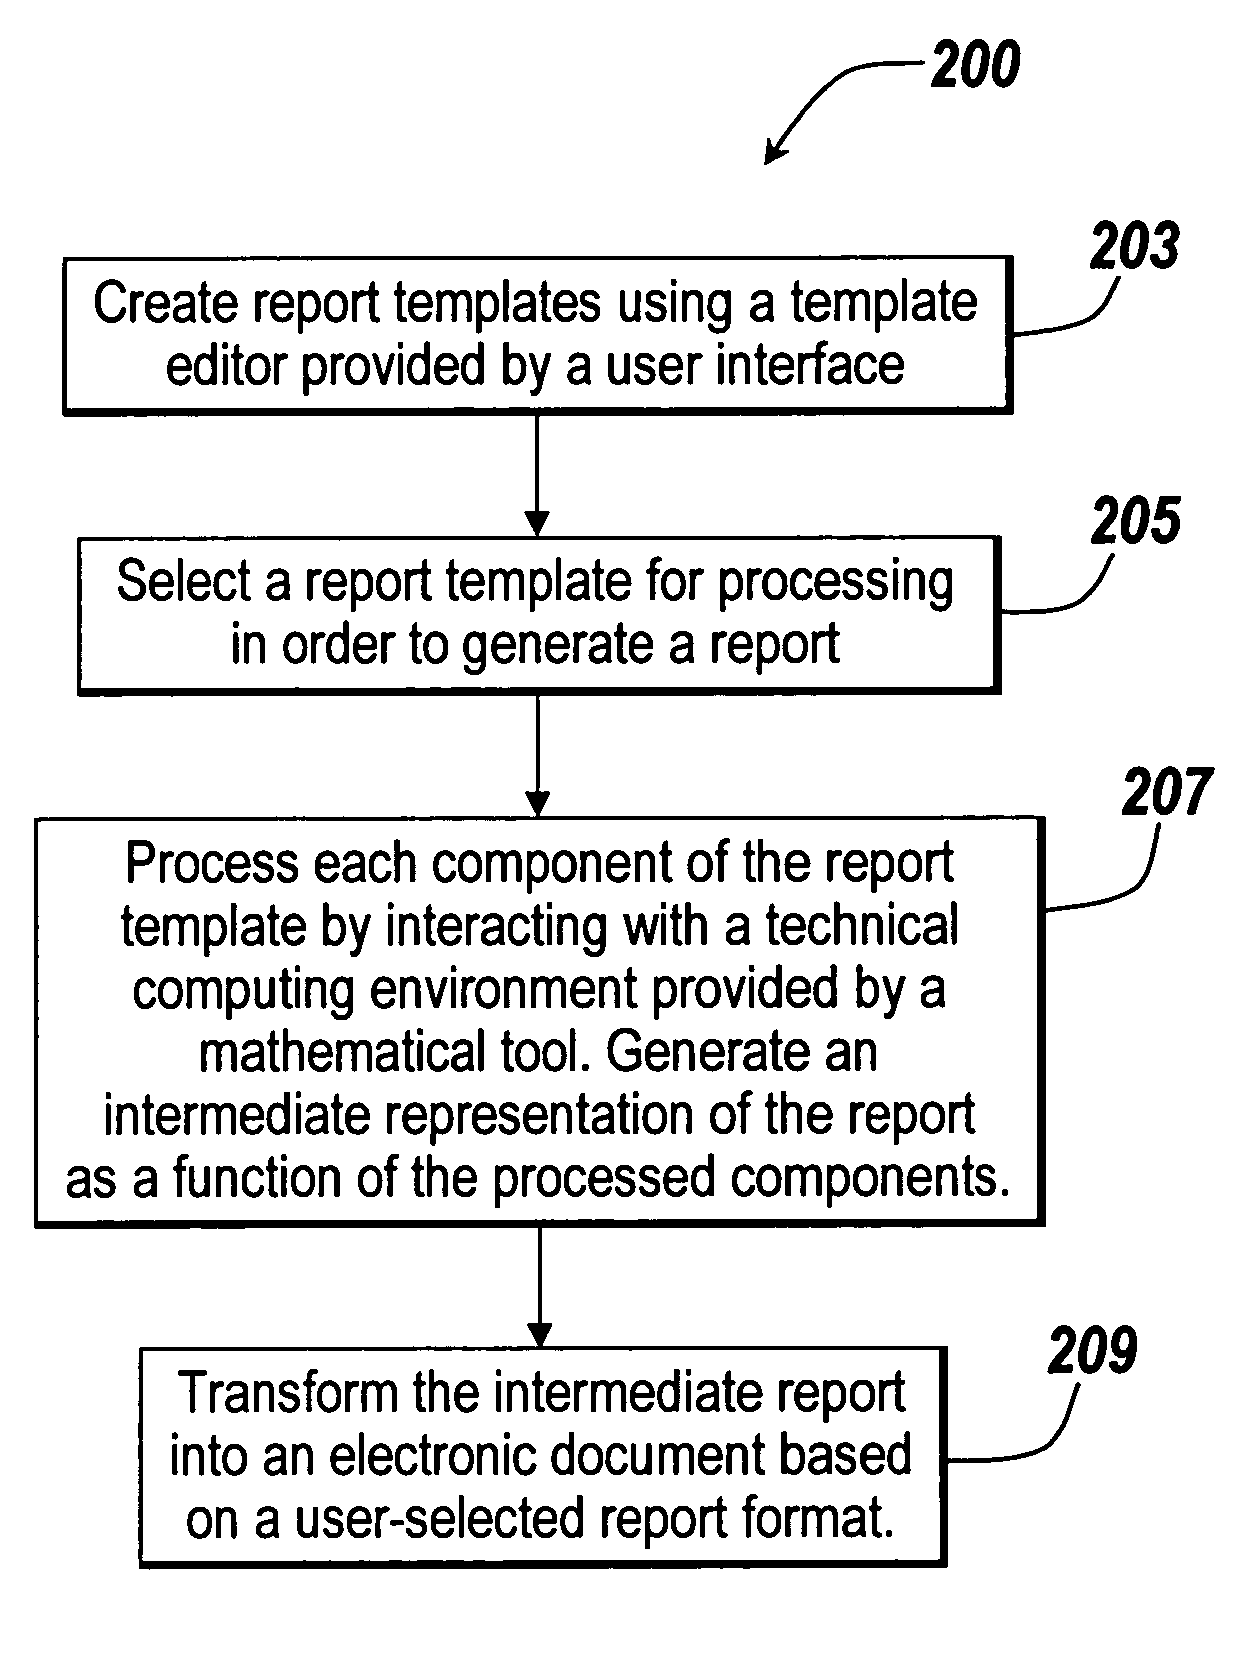 Report generator for a mathematical computing environment